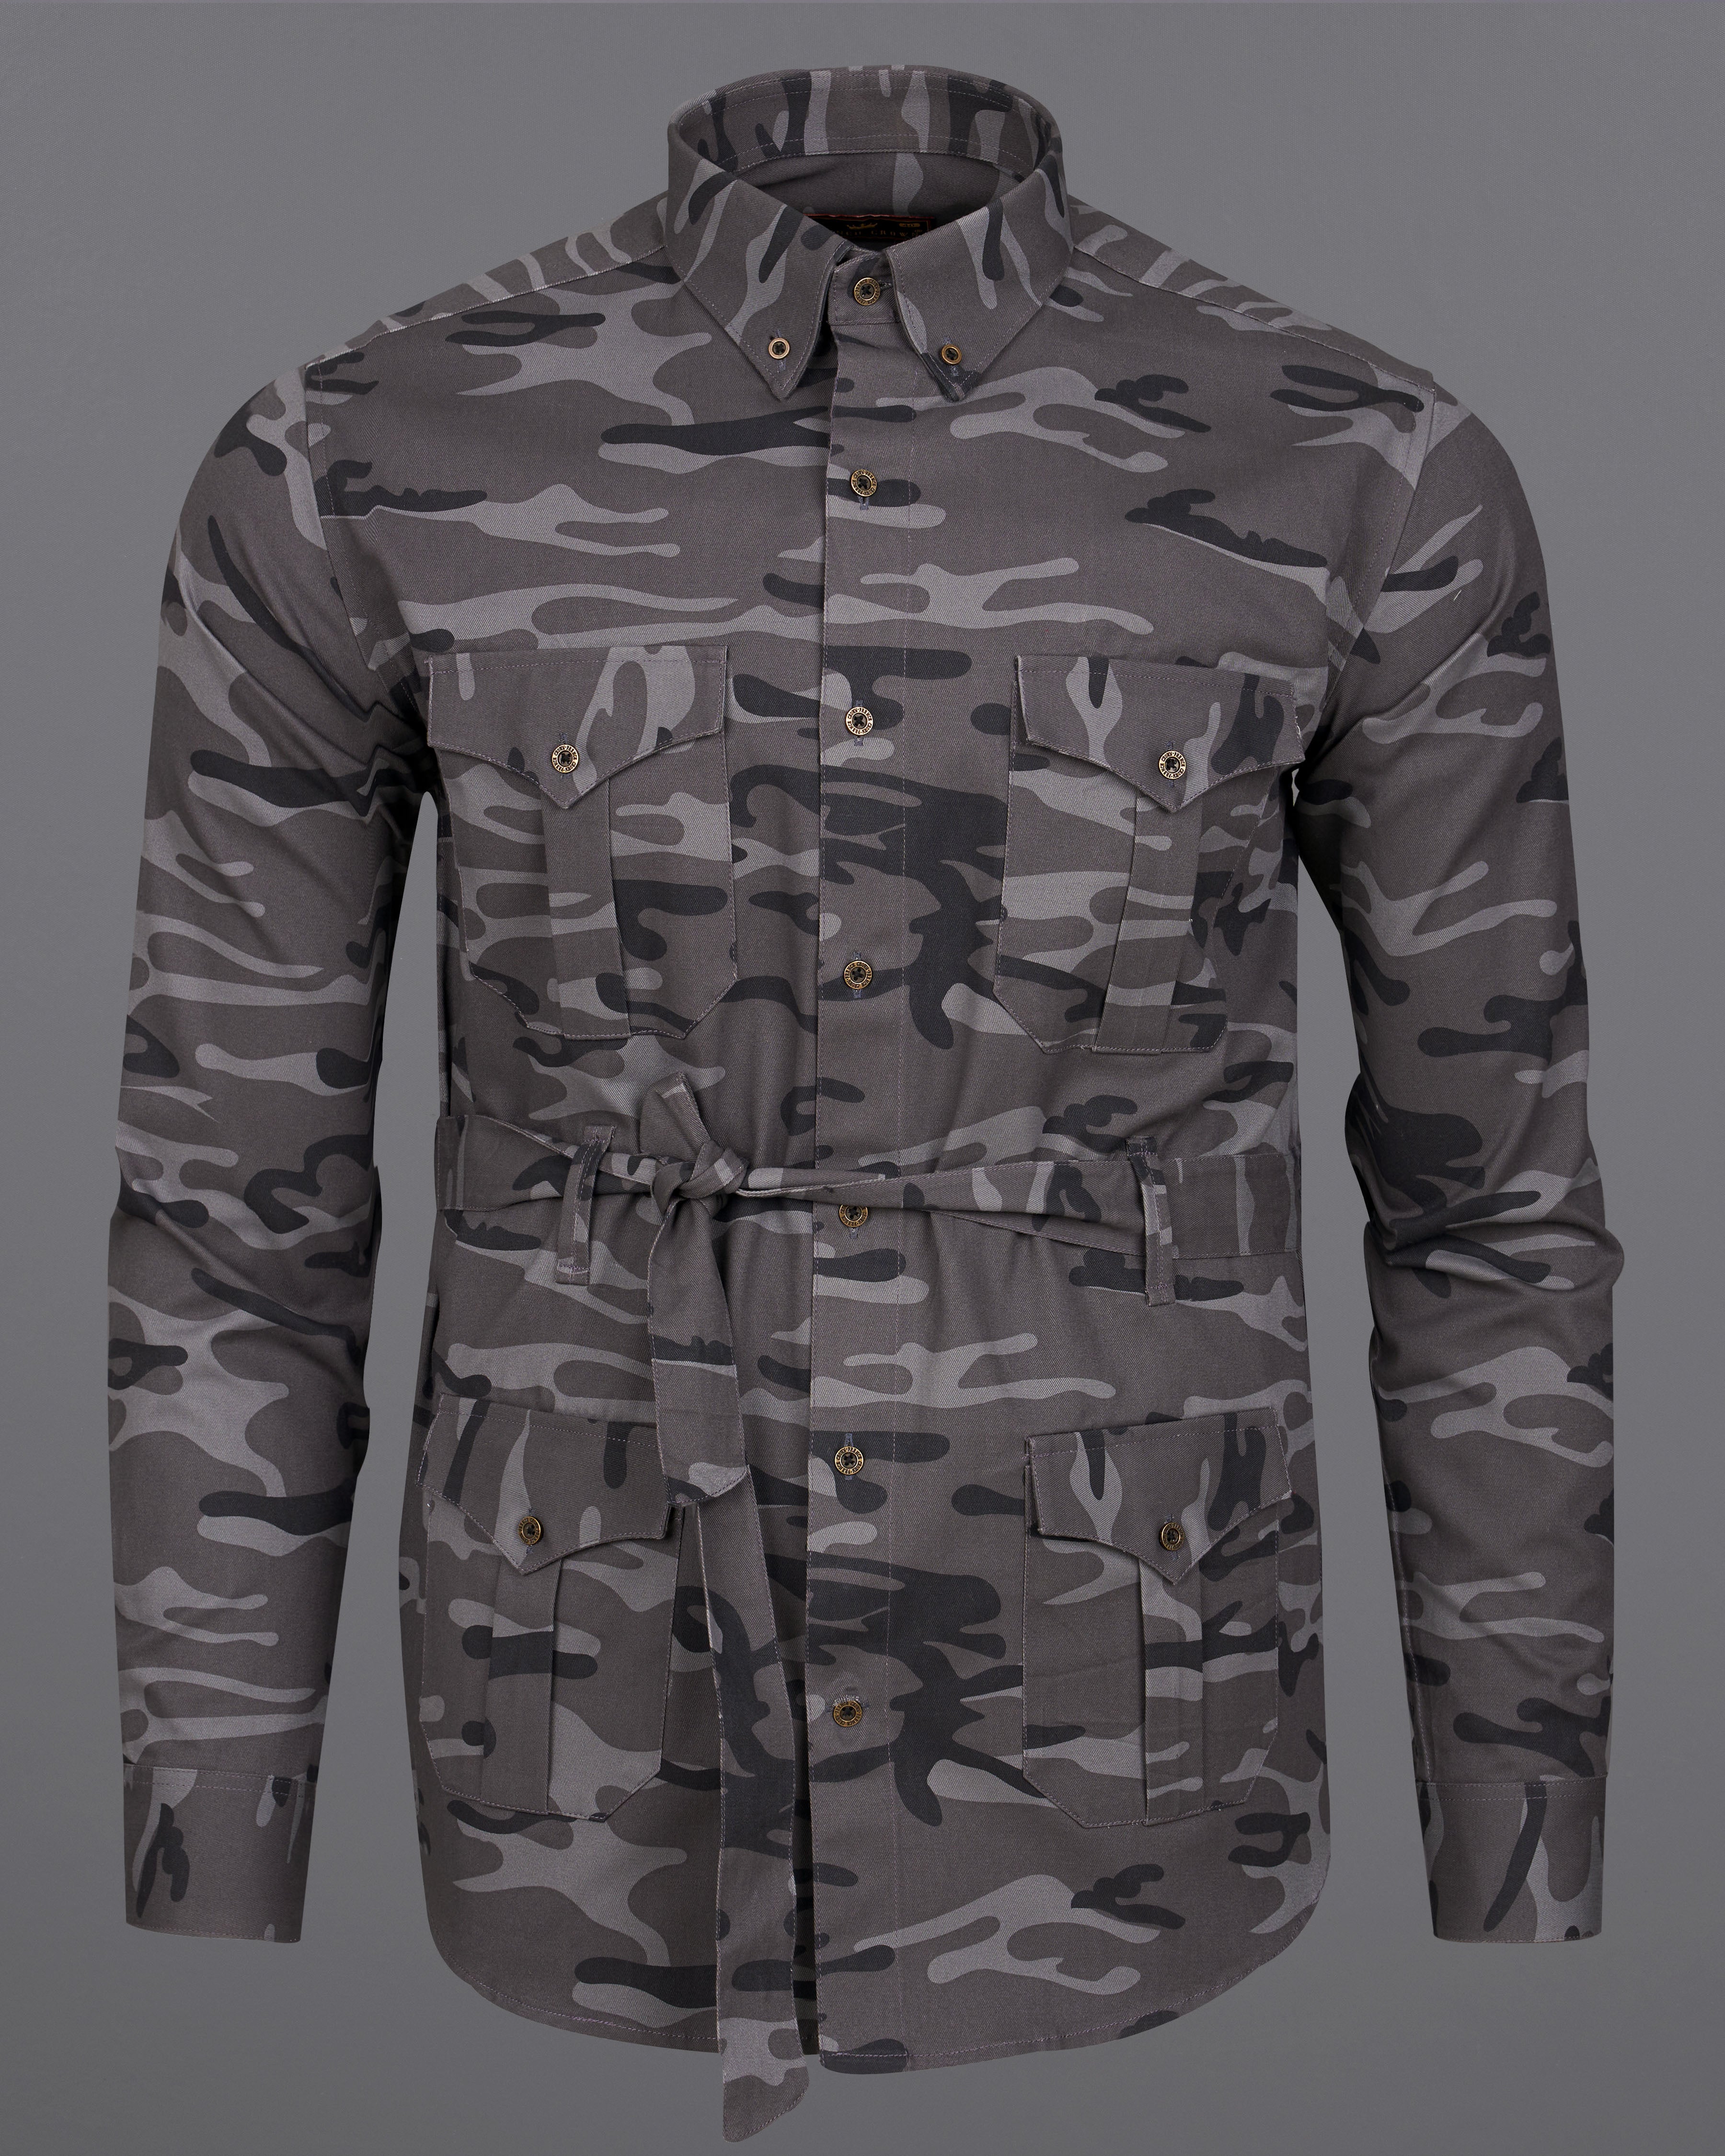 Vampire Gray with Black Camouflage Royal Oxford Designer Shirt with Belt Closure 9184-BD-OS-MB-D121-38,9184-BD-OS-MB-D121-H-38,9184-BD-OS-MB-D121-39,9184-BD-OS-MB-D121-H-39,9184-BD-OS-MB-D121-40,9184-BD-OS-MB-D121-H-40,9184-BD-OS-MB-D121-42,9184-BD-OS-MB-D121-H-42,9184-BD-OS-MB-D121-44,9184-BD-OS-MB-D121-H-44,9184-BD-OS-MB-D121-46,9184-BD-OS-MB-D121-H-46,9184-BD-OS-MB-D121-48,9184-BD-OS-MB-D121-H-48,9184-BD-OS-MB-D121-50,9184-BD-OS-MB-D121-H-50,9184-BD-OS-MB-D121-52,9184-BD-OS-MB-D121-H-52